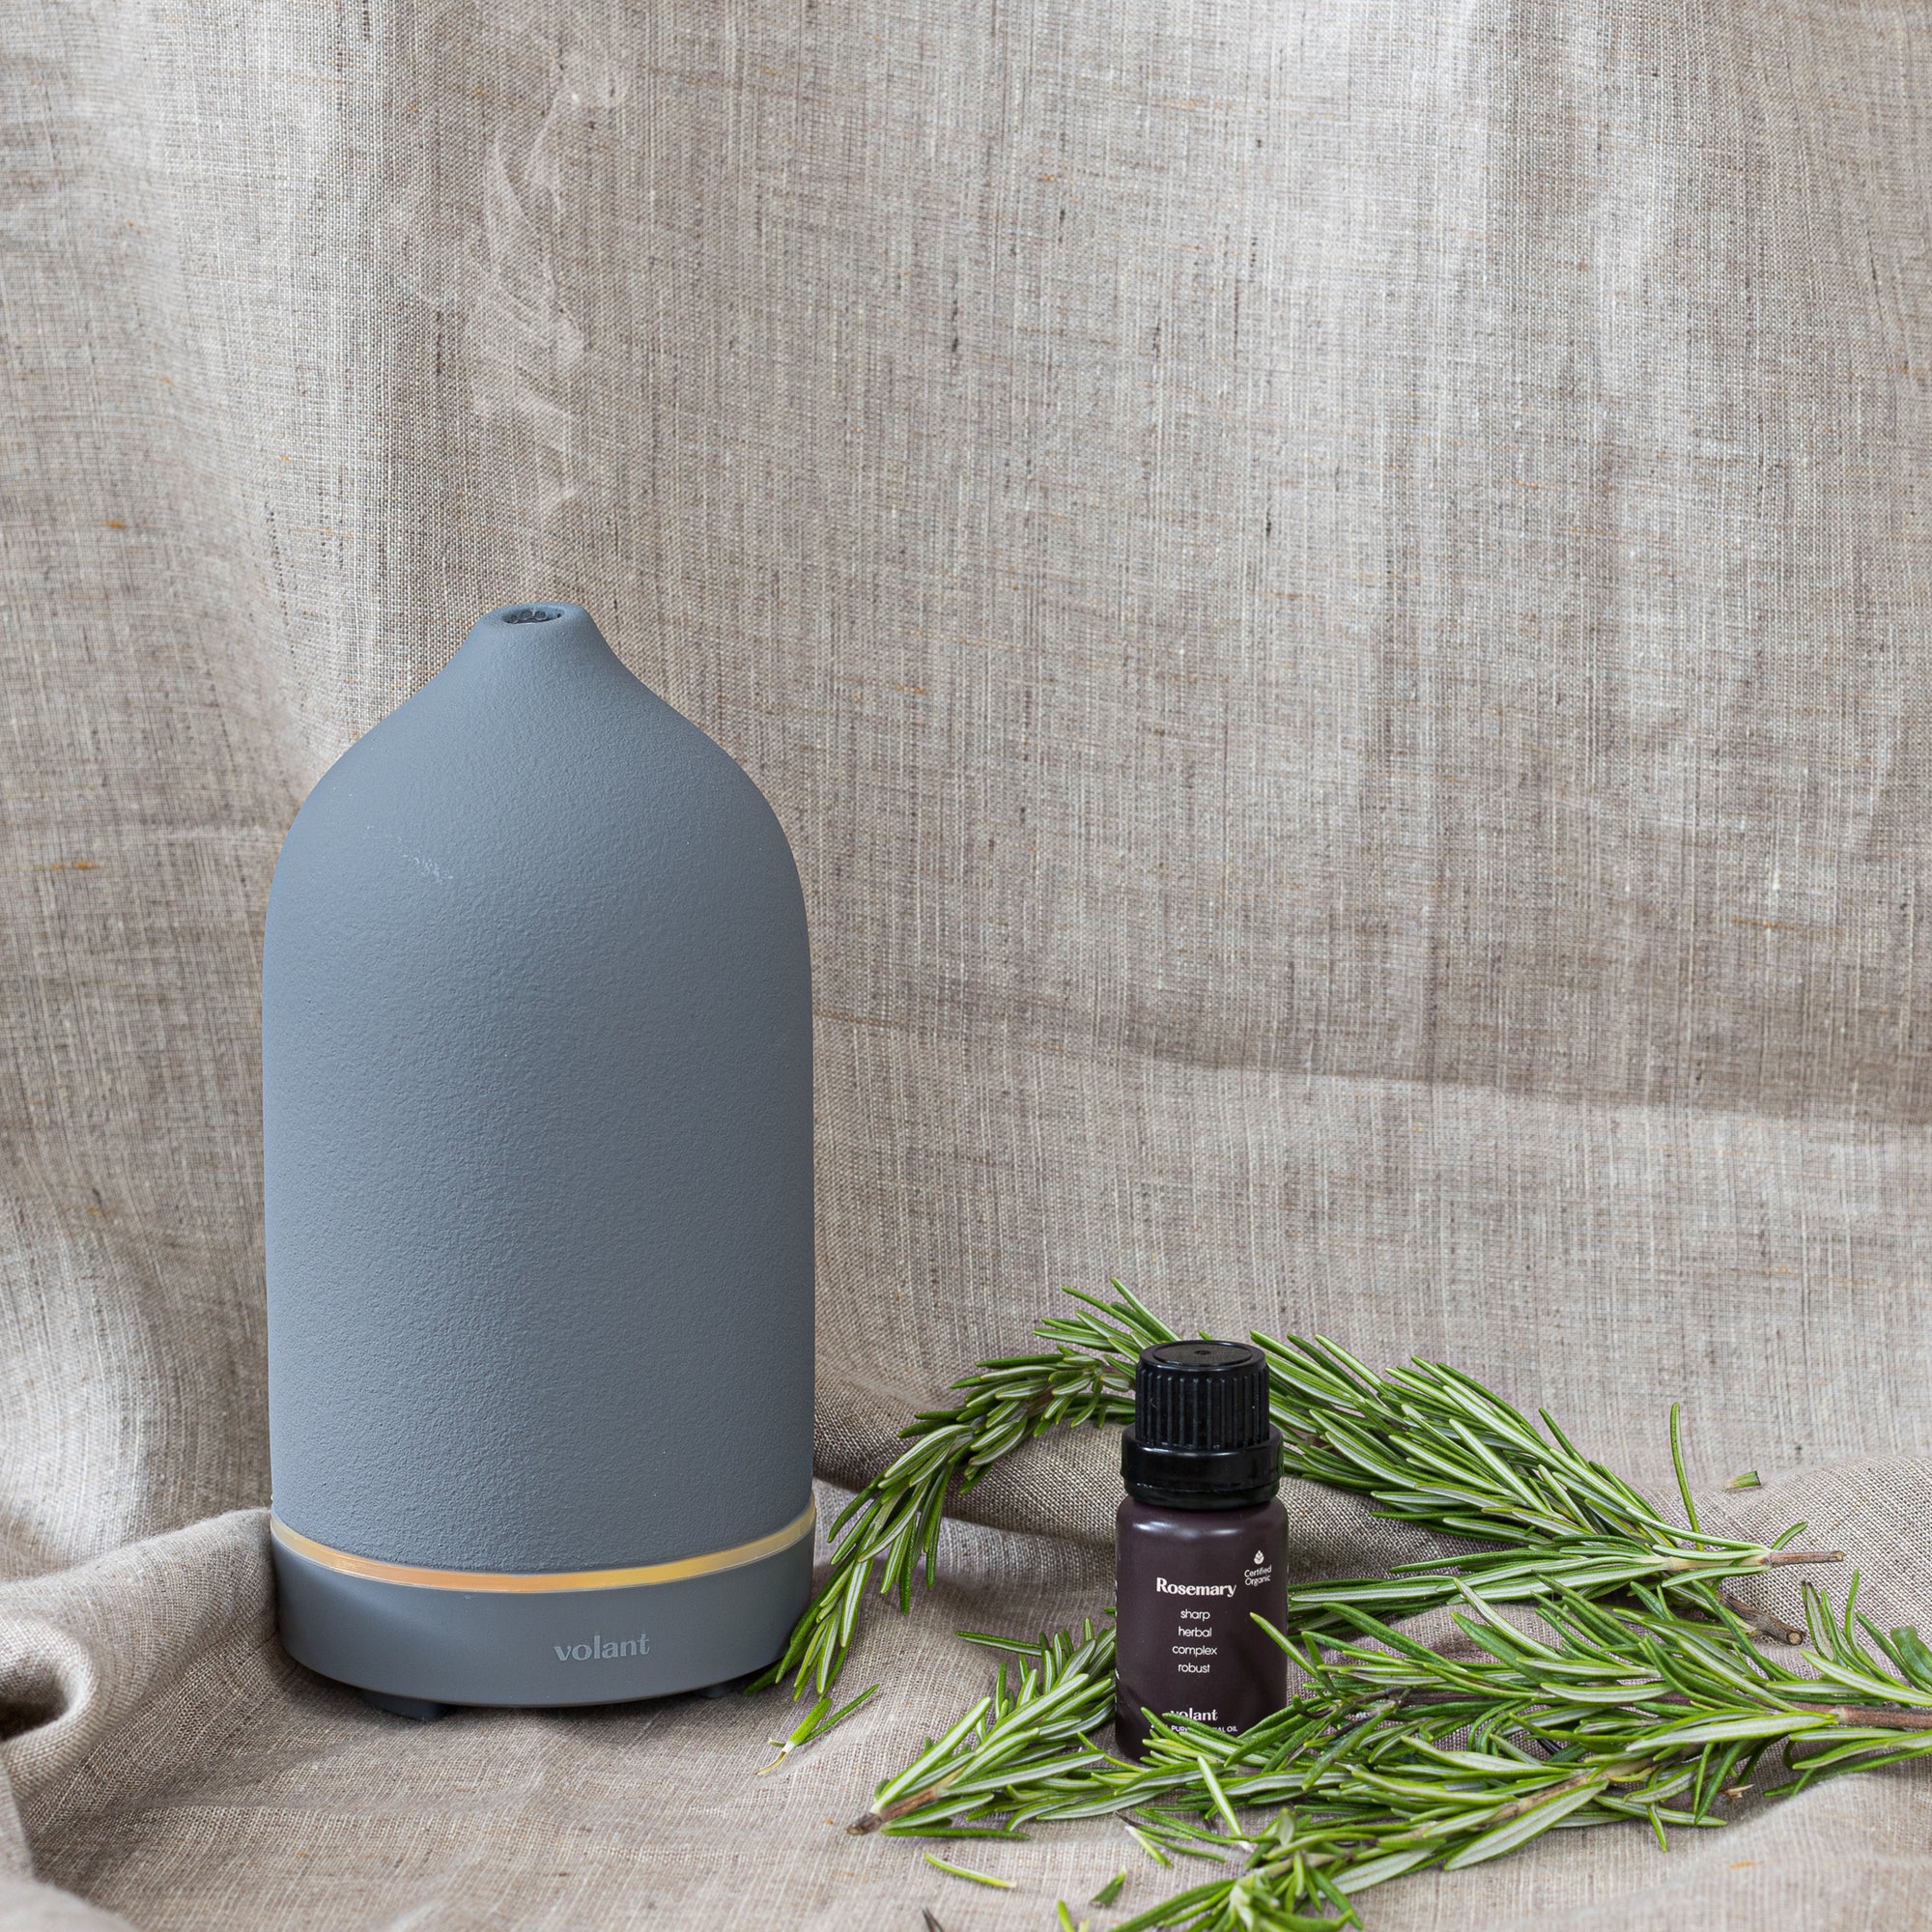 volant grey diffuser using organic rosemary essential oil to relieve stress and relax